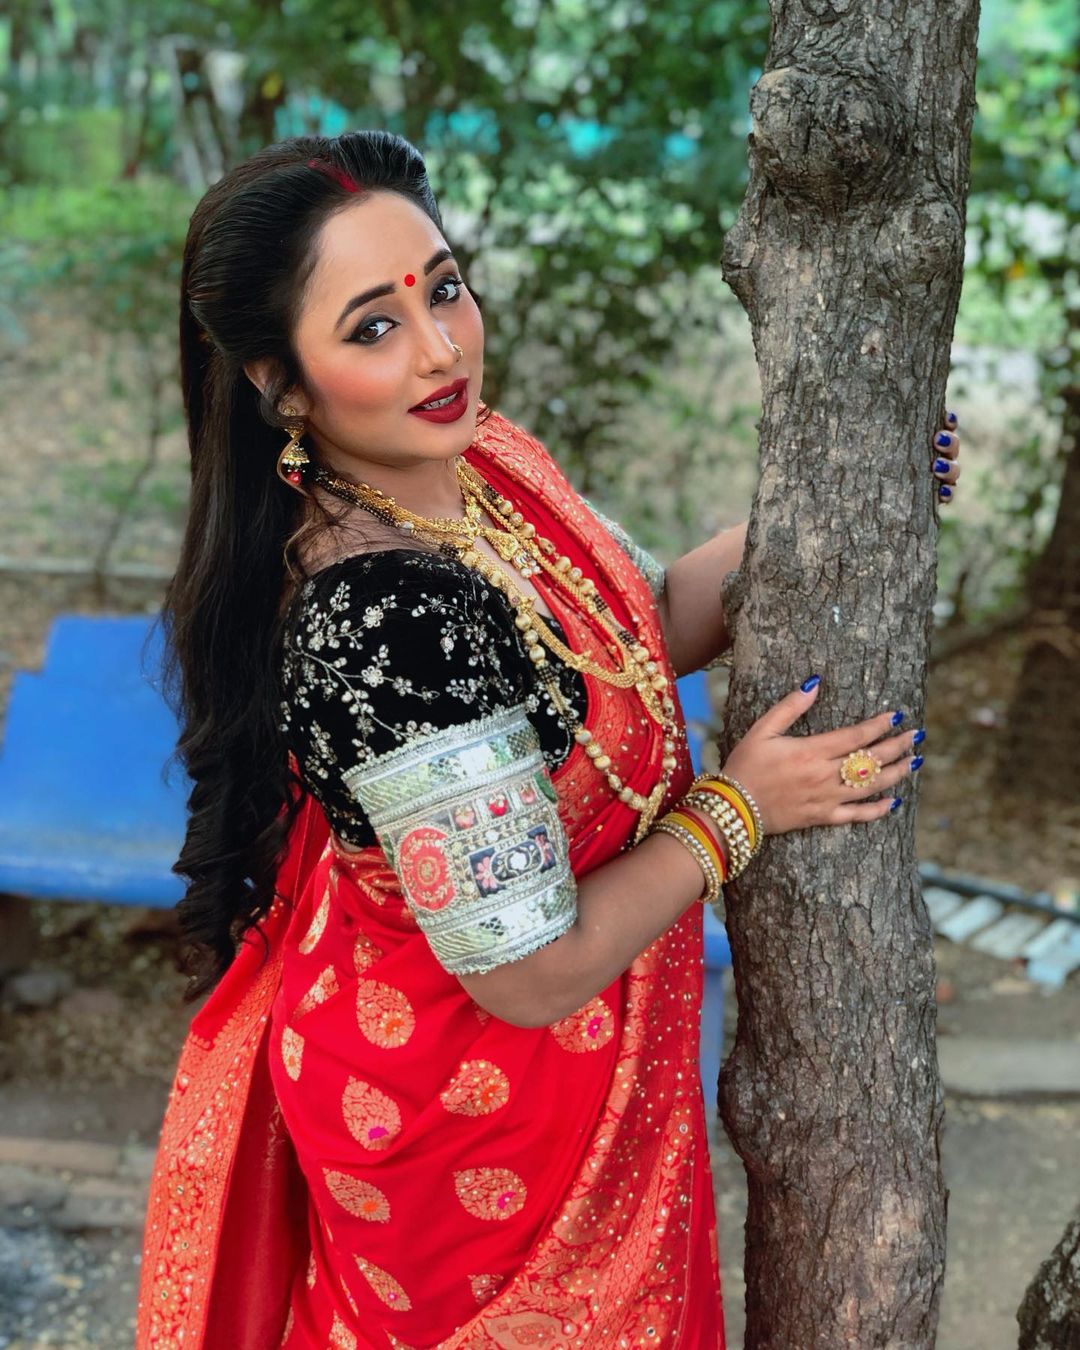 The queen of Bhojpuri cinema is fond of colorful sarees 12277